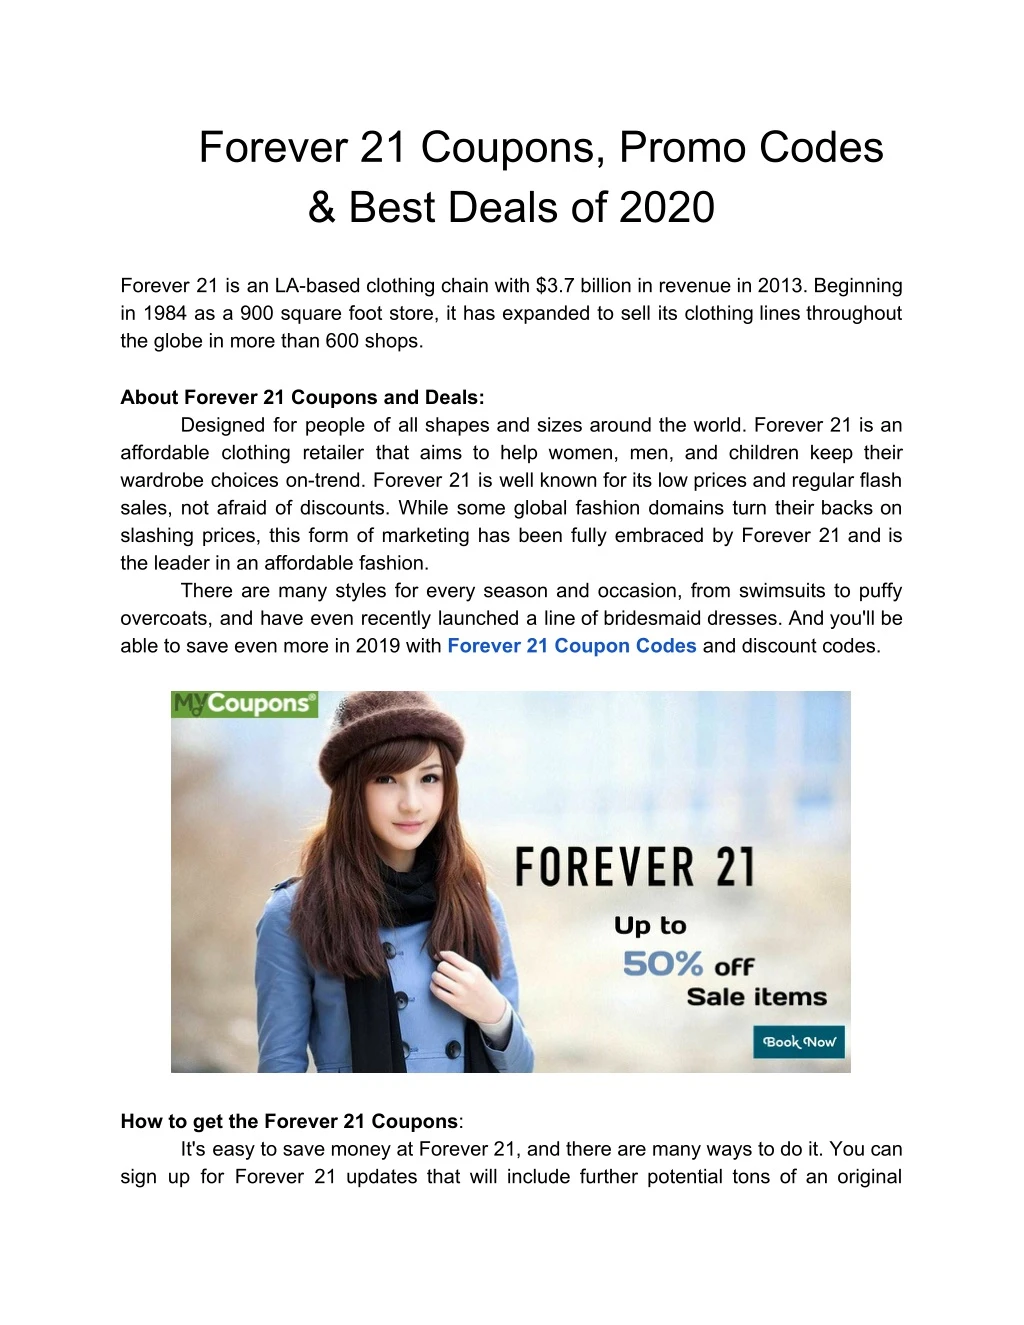 forever 21 coupons promo codes best deals of 2020